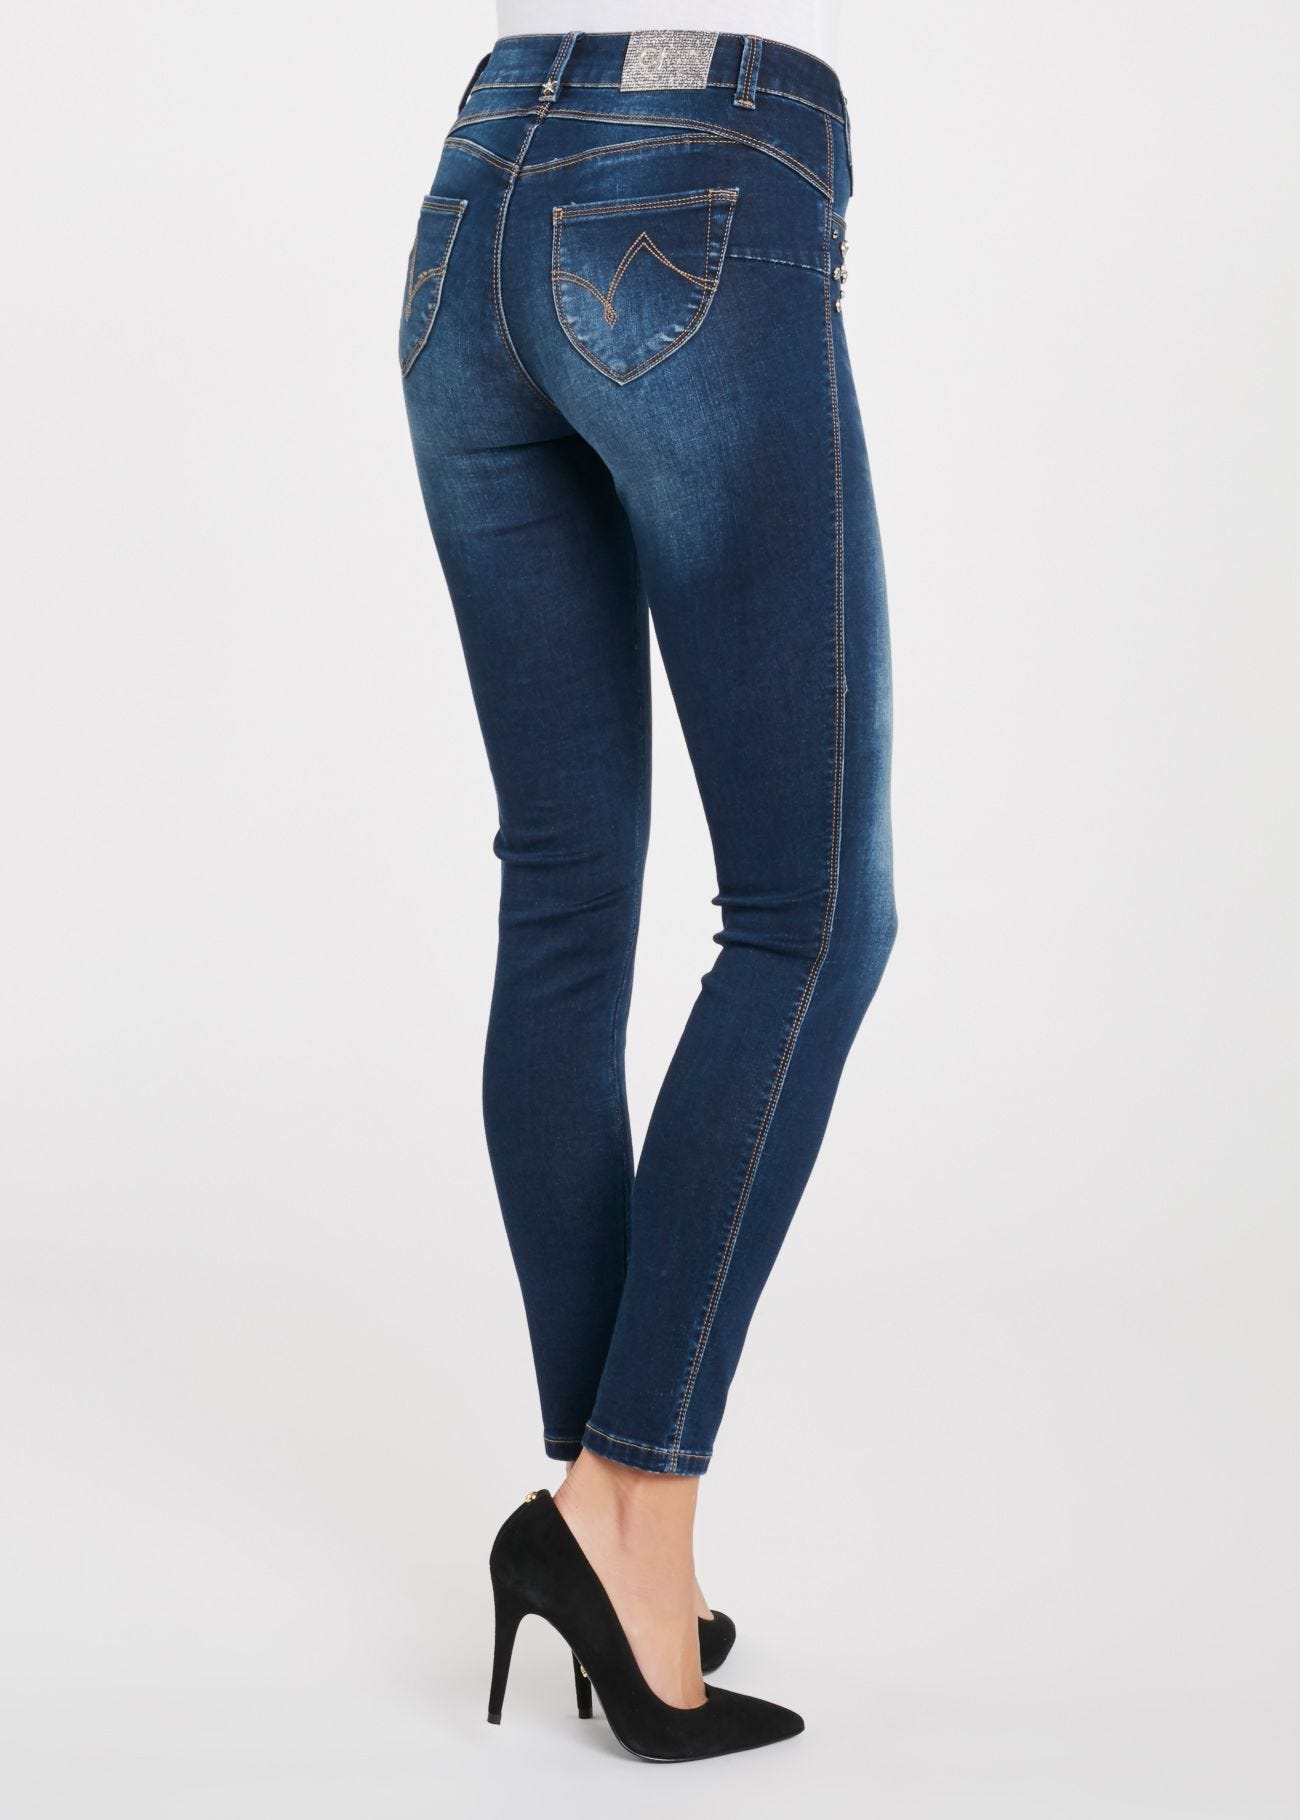 Jeans with rounded yoke